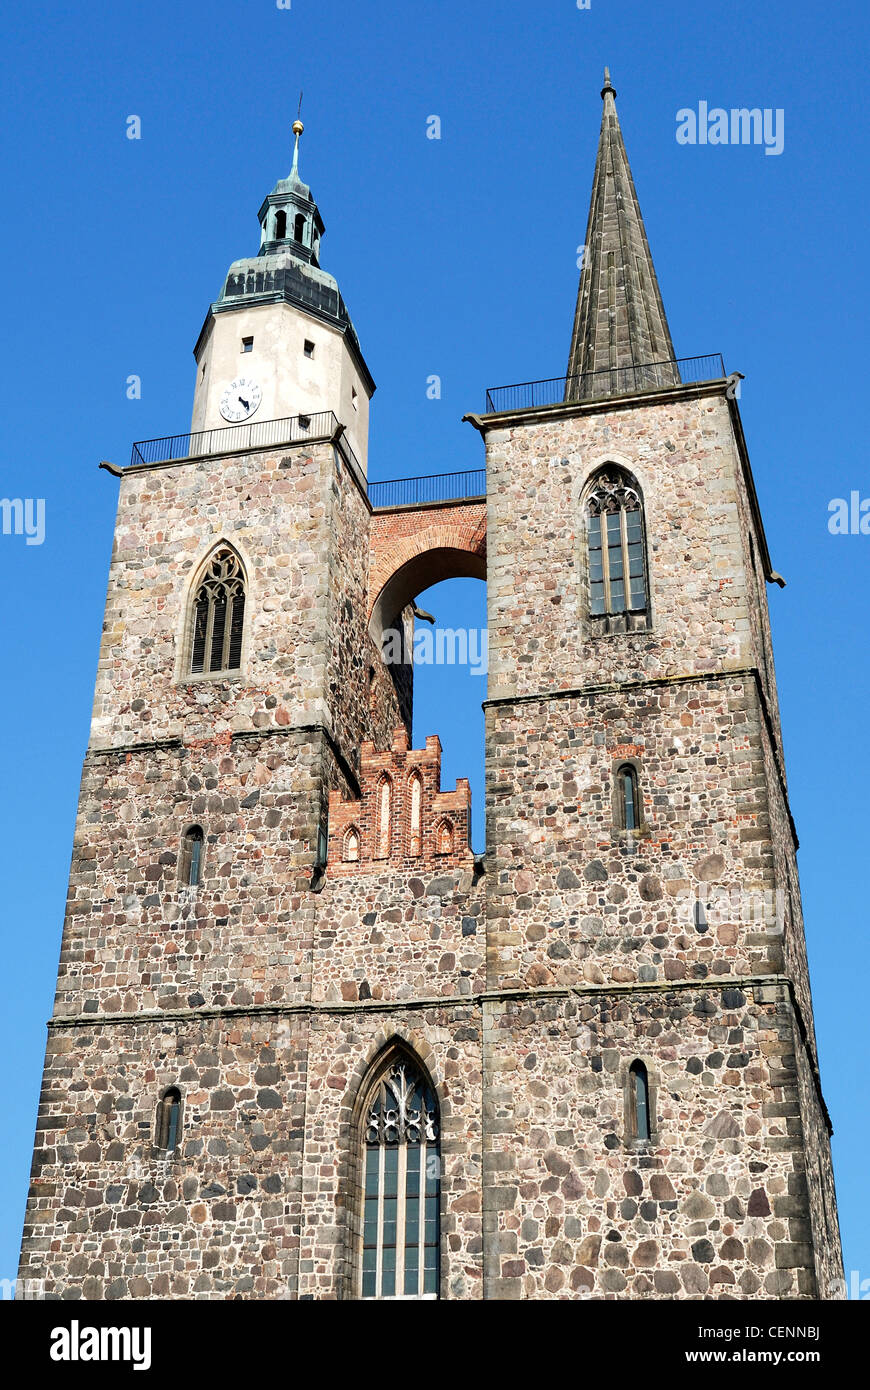 The towers of the Nikolaikirche in the historical town centre of Jueterbog. Stock Photo